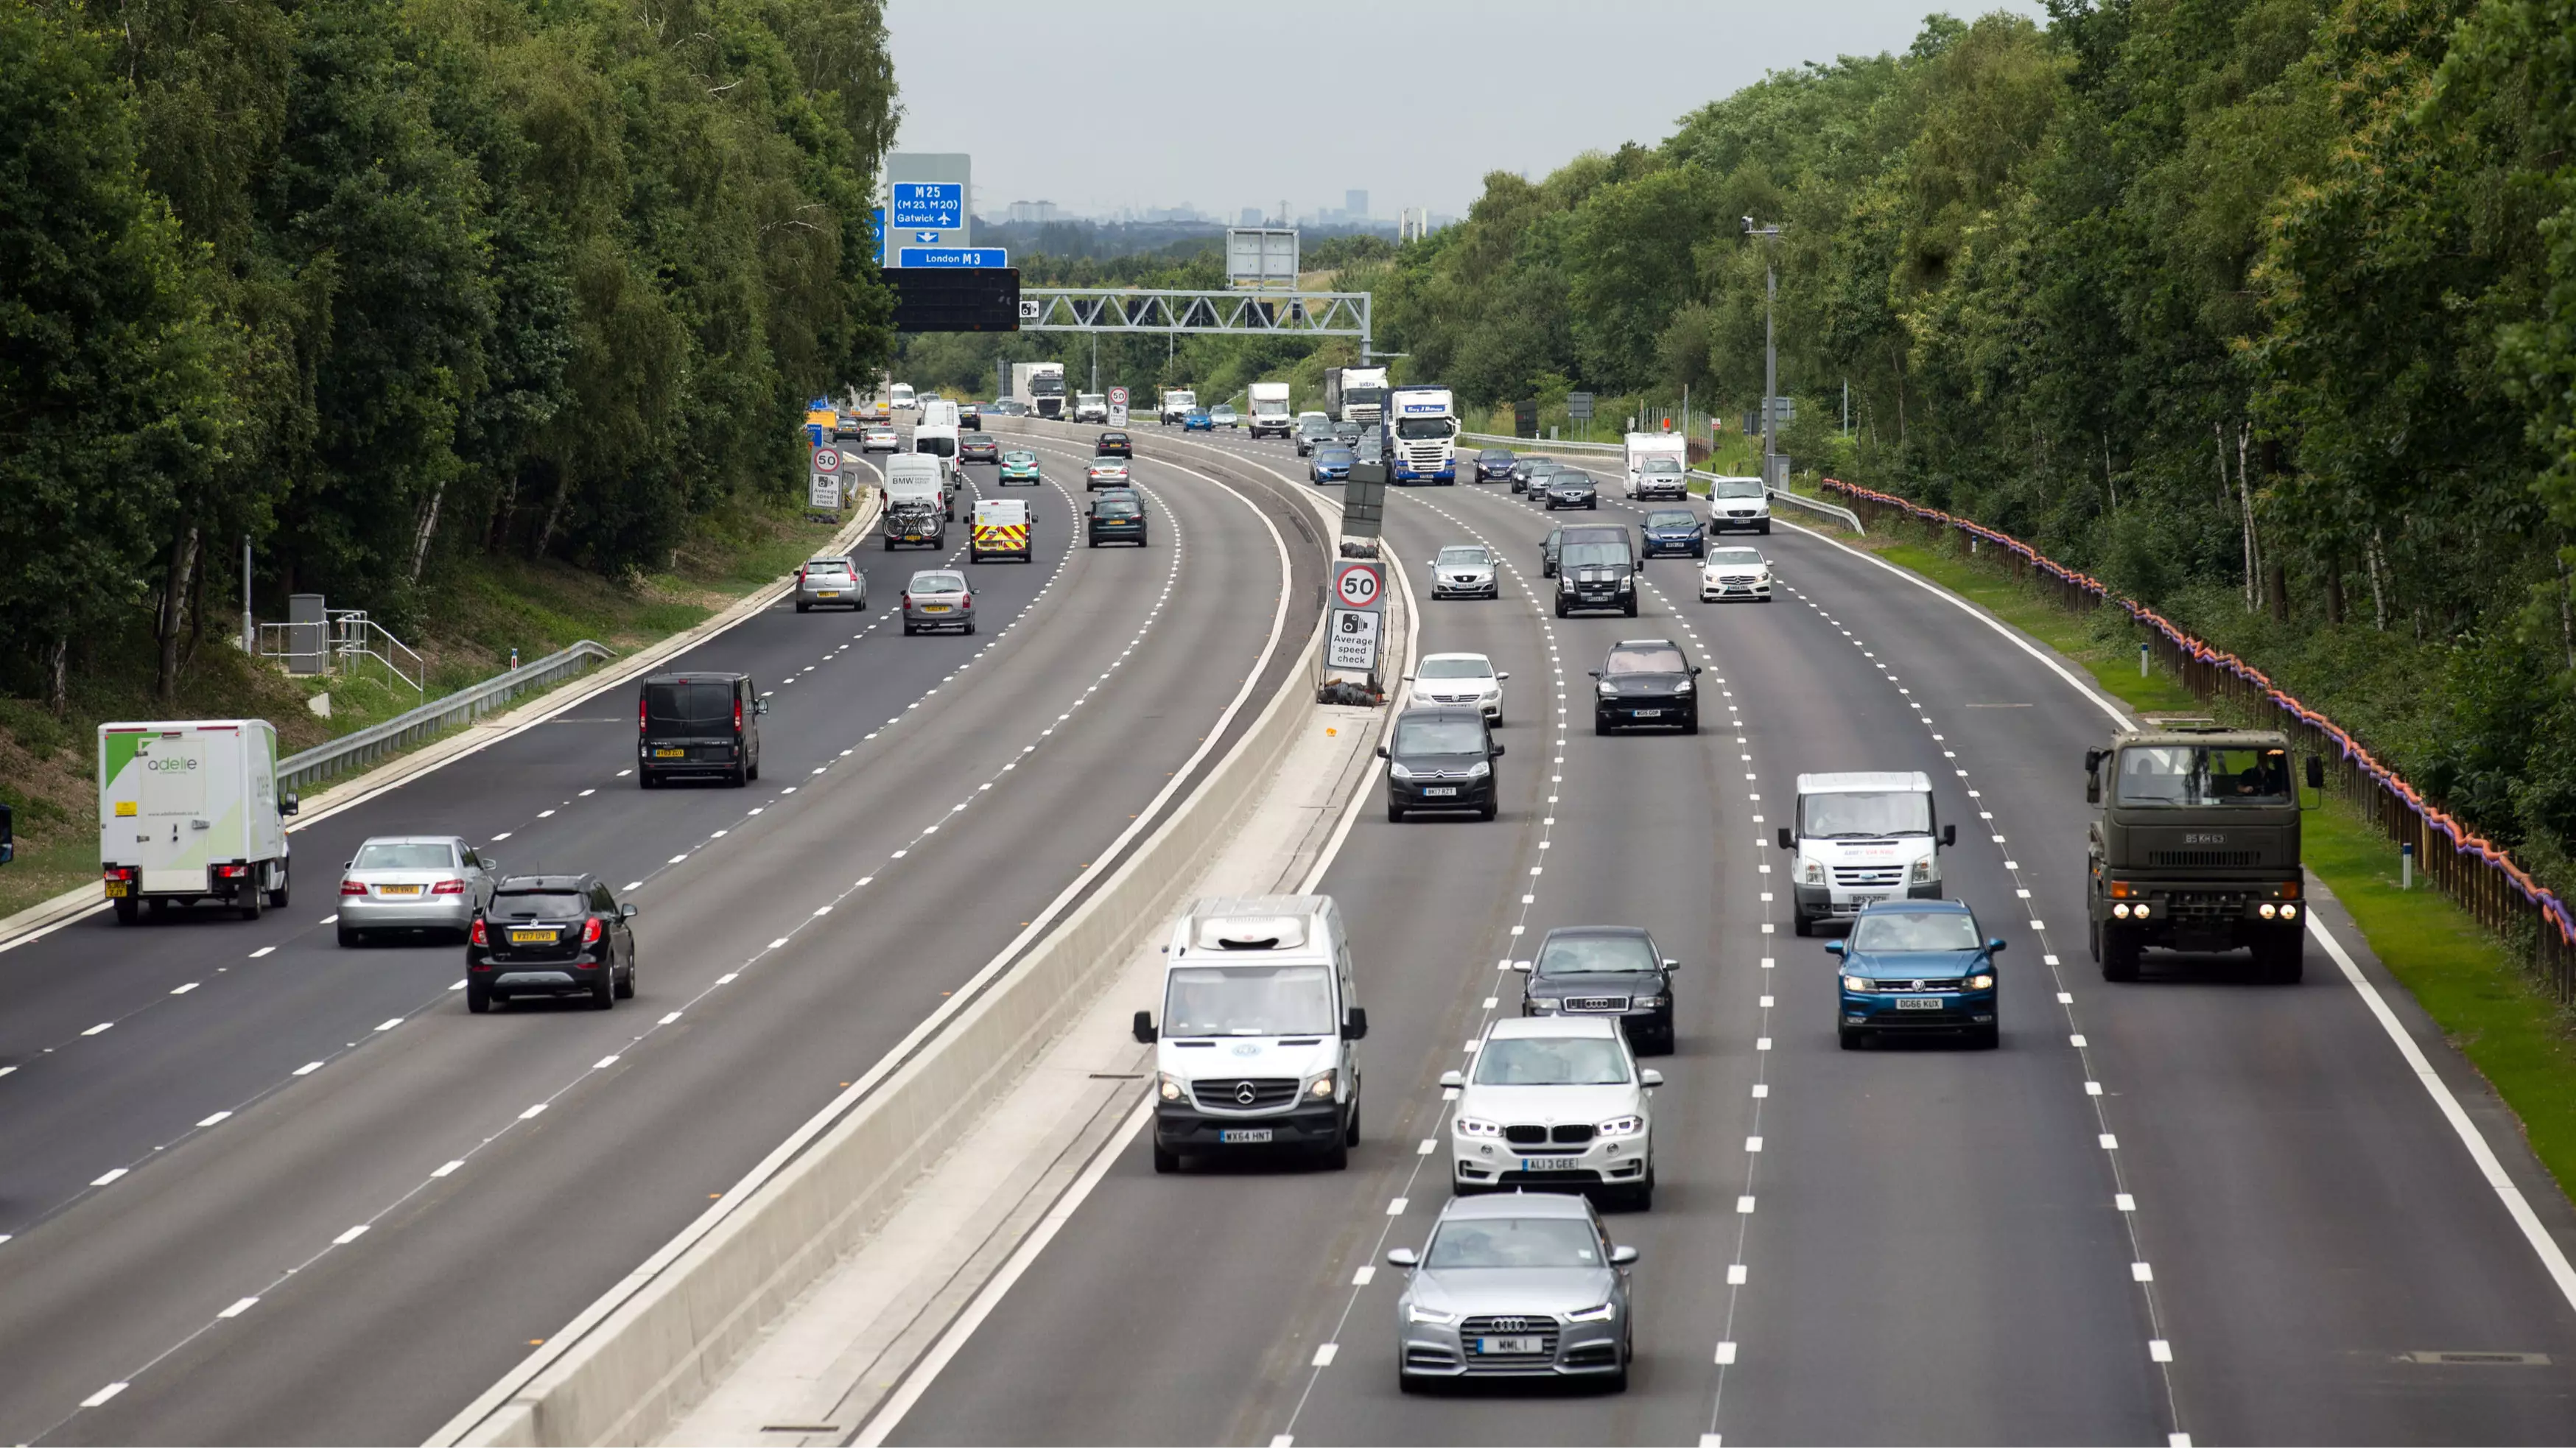 New Motorway Cameras Could Fine Drivers £100 For Tailgating